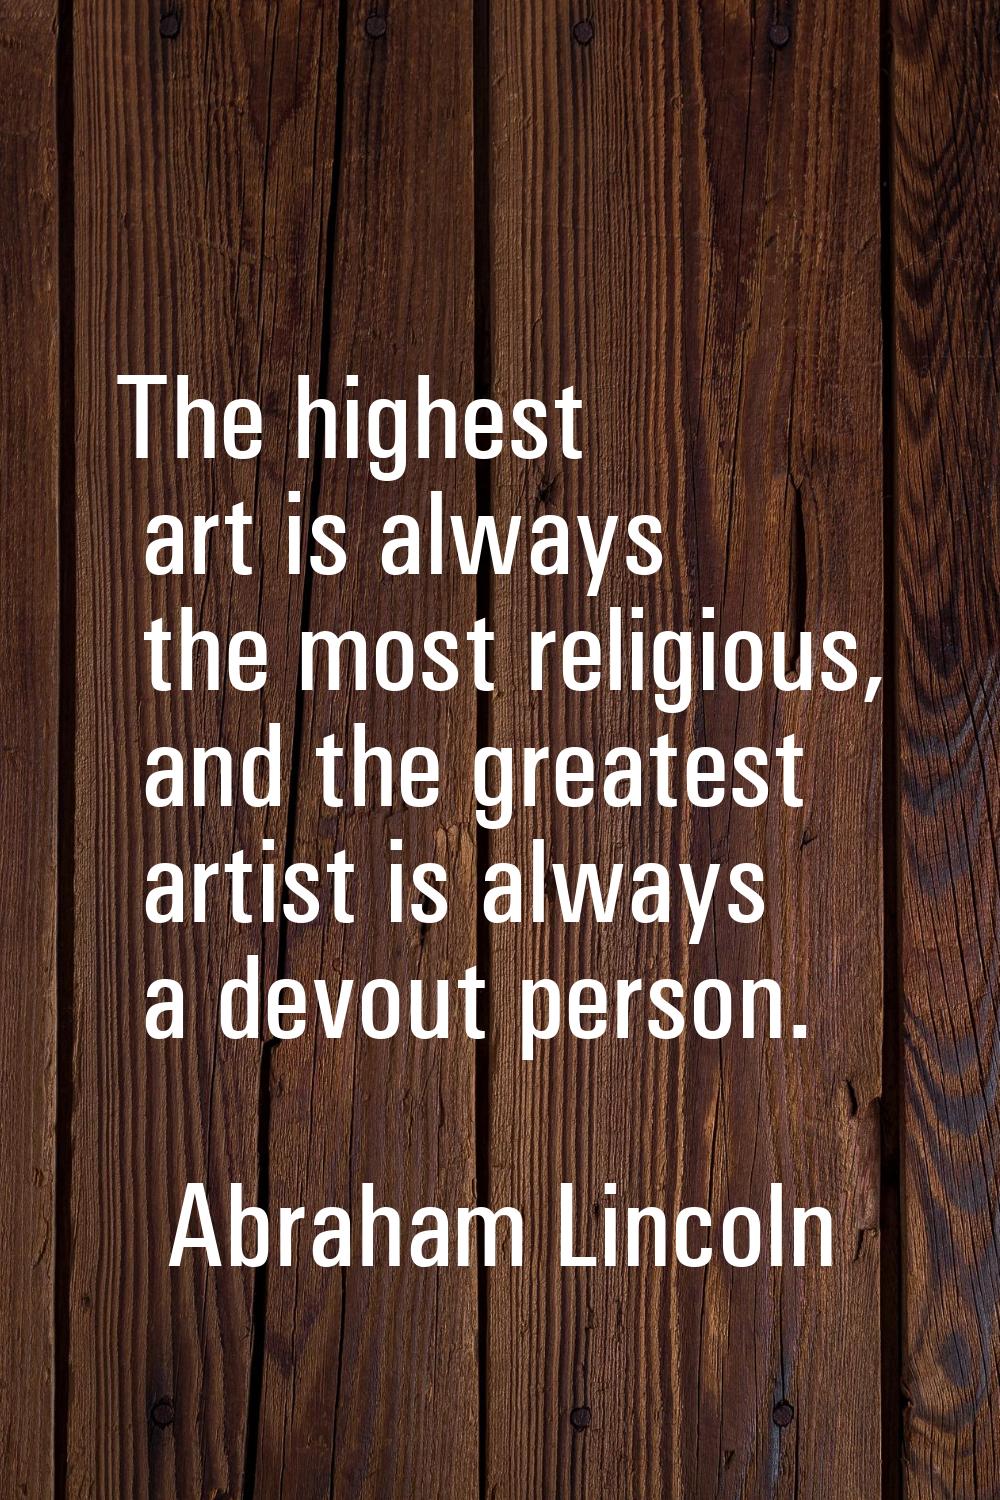 The highest art is always the most religious, and the greatest artist is always a devout person.